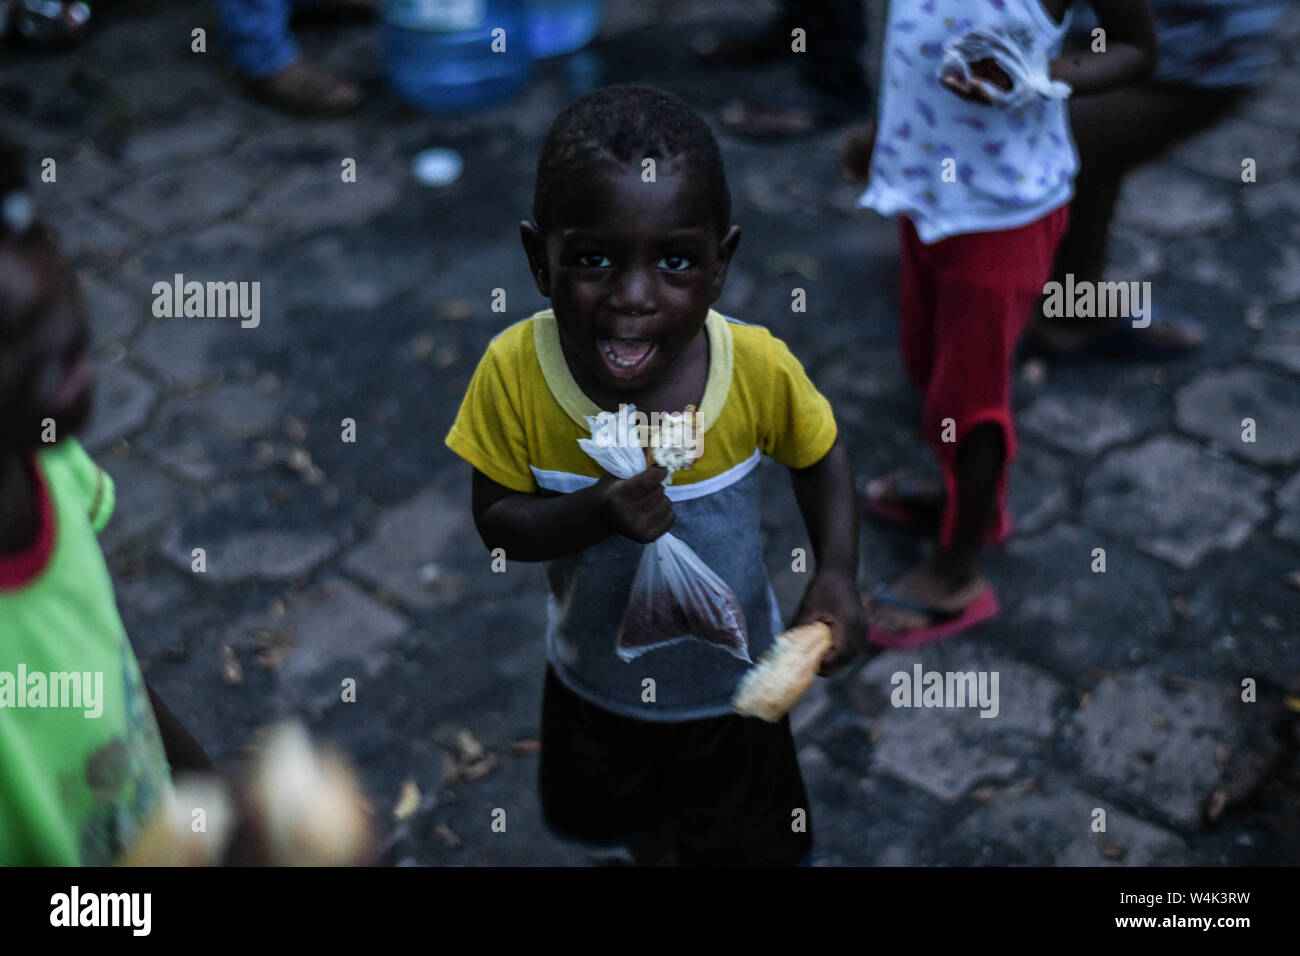 Tapachula, Chiapas, Mexico. 23rd July, 2019. Children from Haitian and African families push to each other on Tuesday, trying to reach a piece of bread and pampers given by catholic nuns of Mision Cristo Resusitado from Guadalajara Mexico, just steps away from Siglo XXI immigration center in Tapachiula, where most wait three to four months for a permit to travel north to the US-Mexico border. Credit: Miguel Juarez Lugo/ZUMA Wire/Alamy Live News Stock Photo